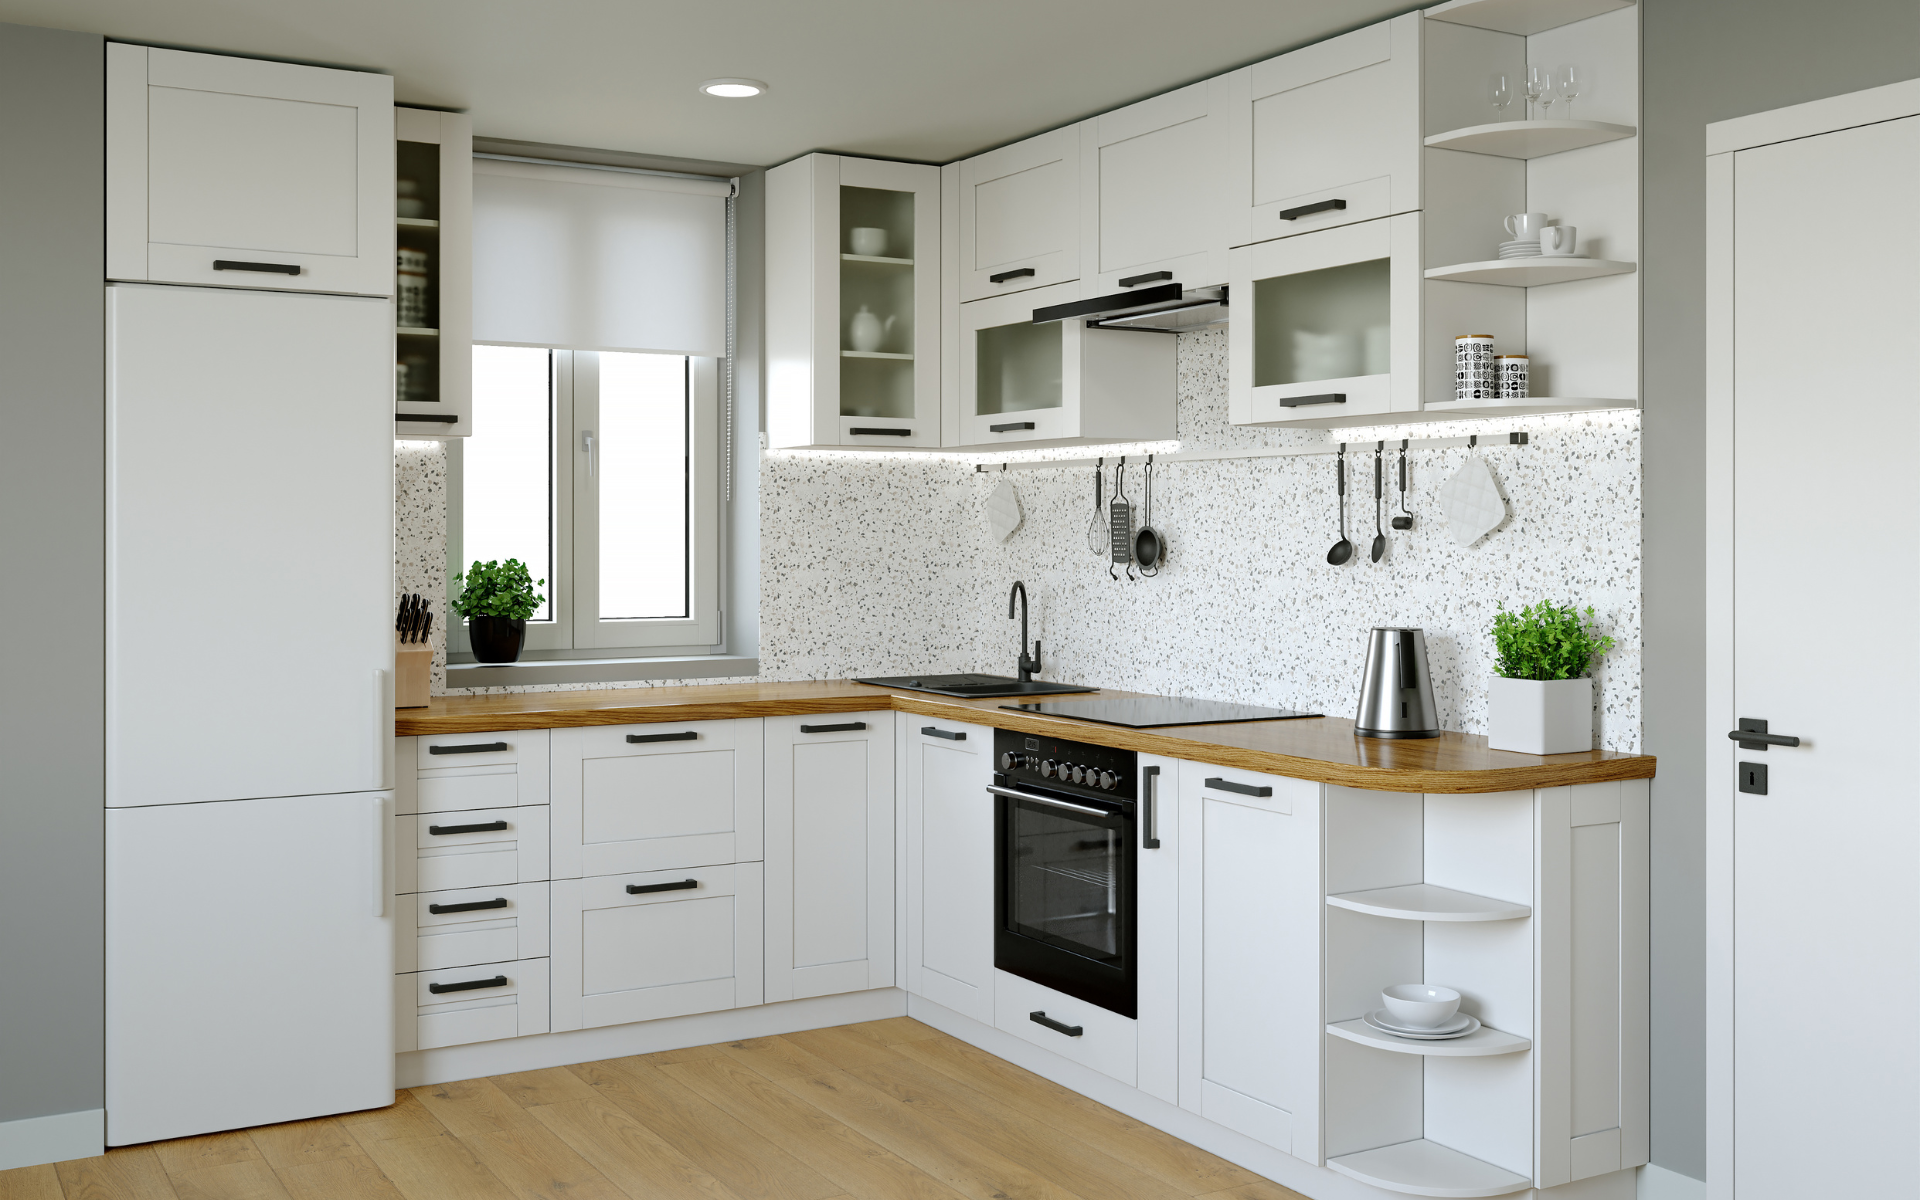 Small L-type kitchen with white shaker cabinets, and artistic backsplash